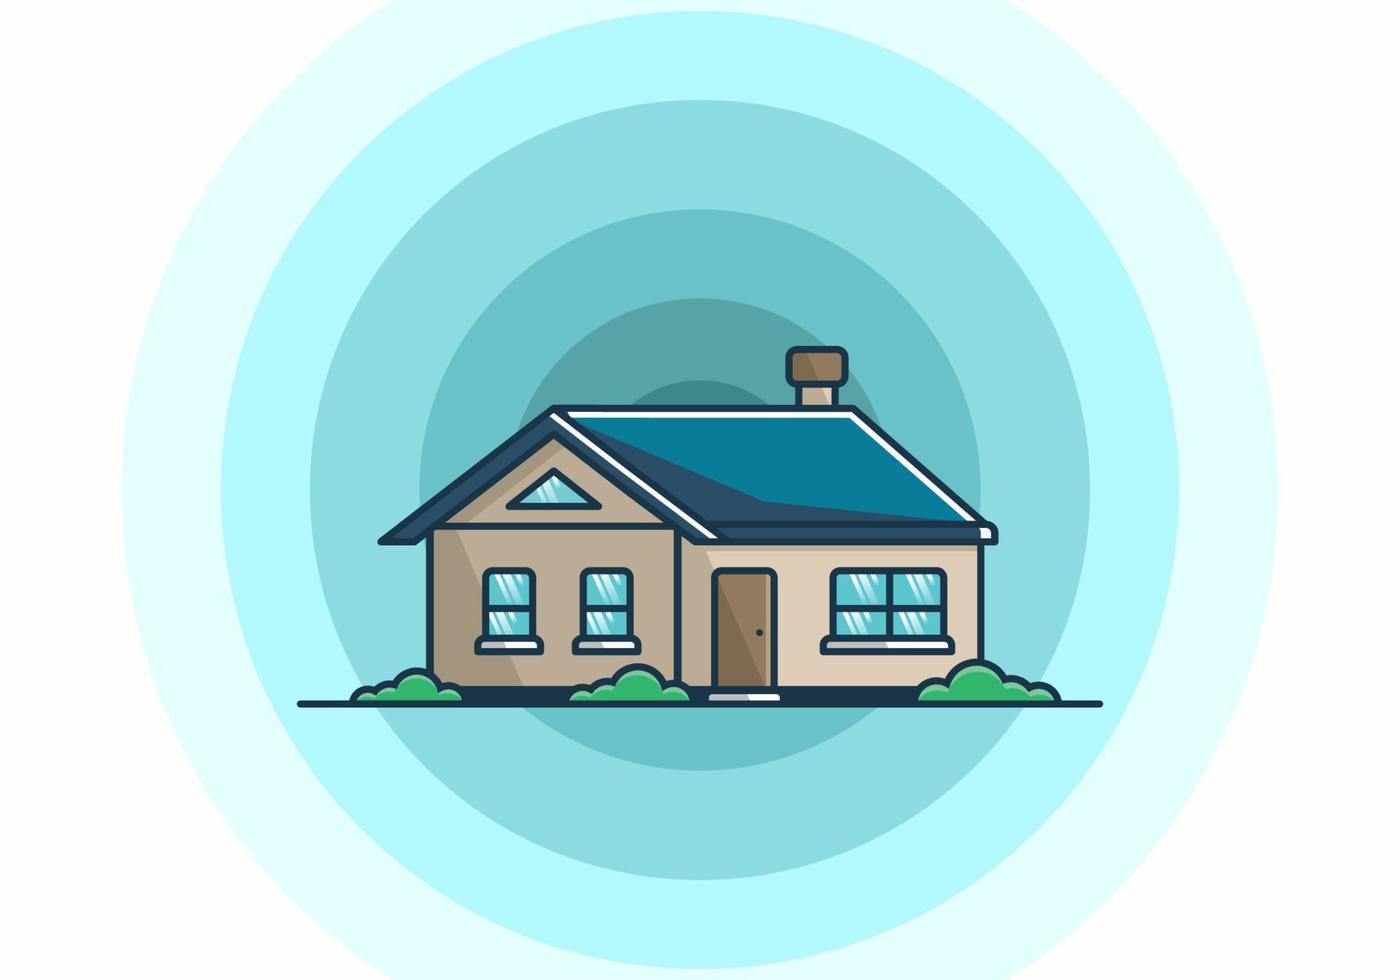 Colorful simple dream house flat illustration vector